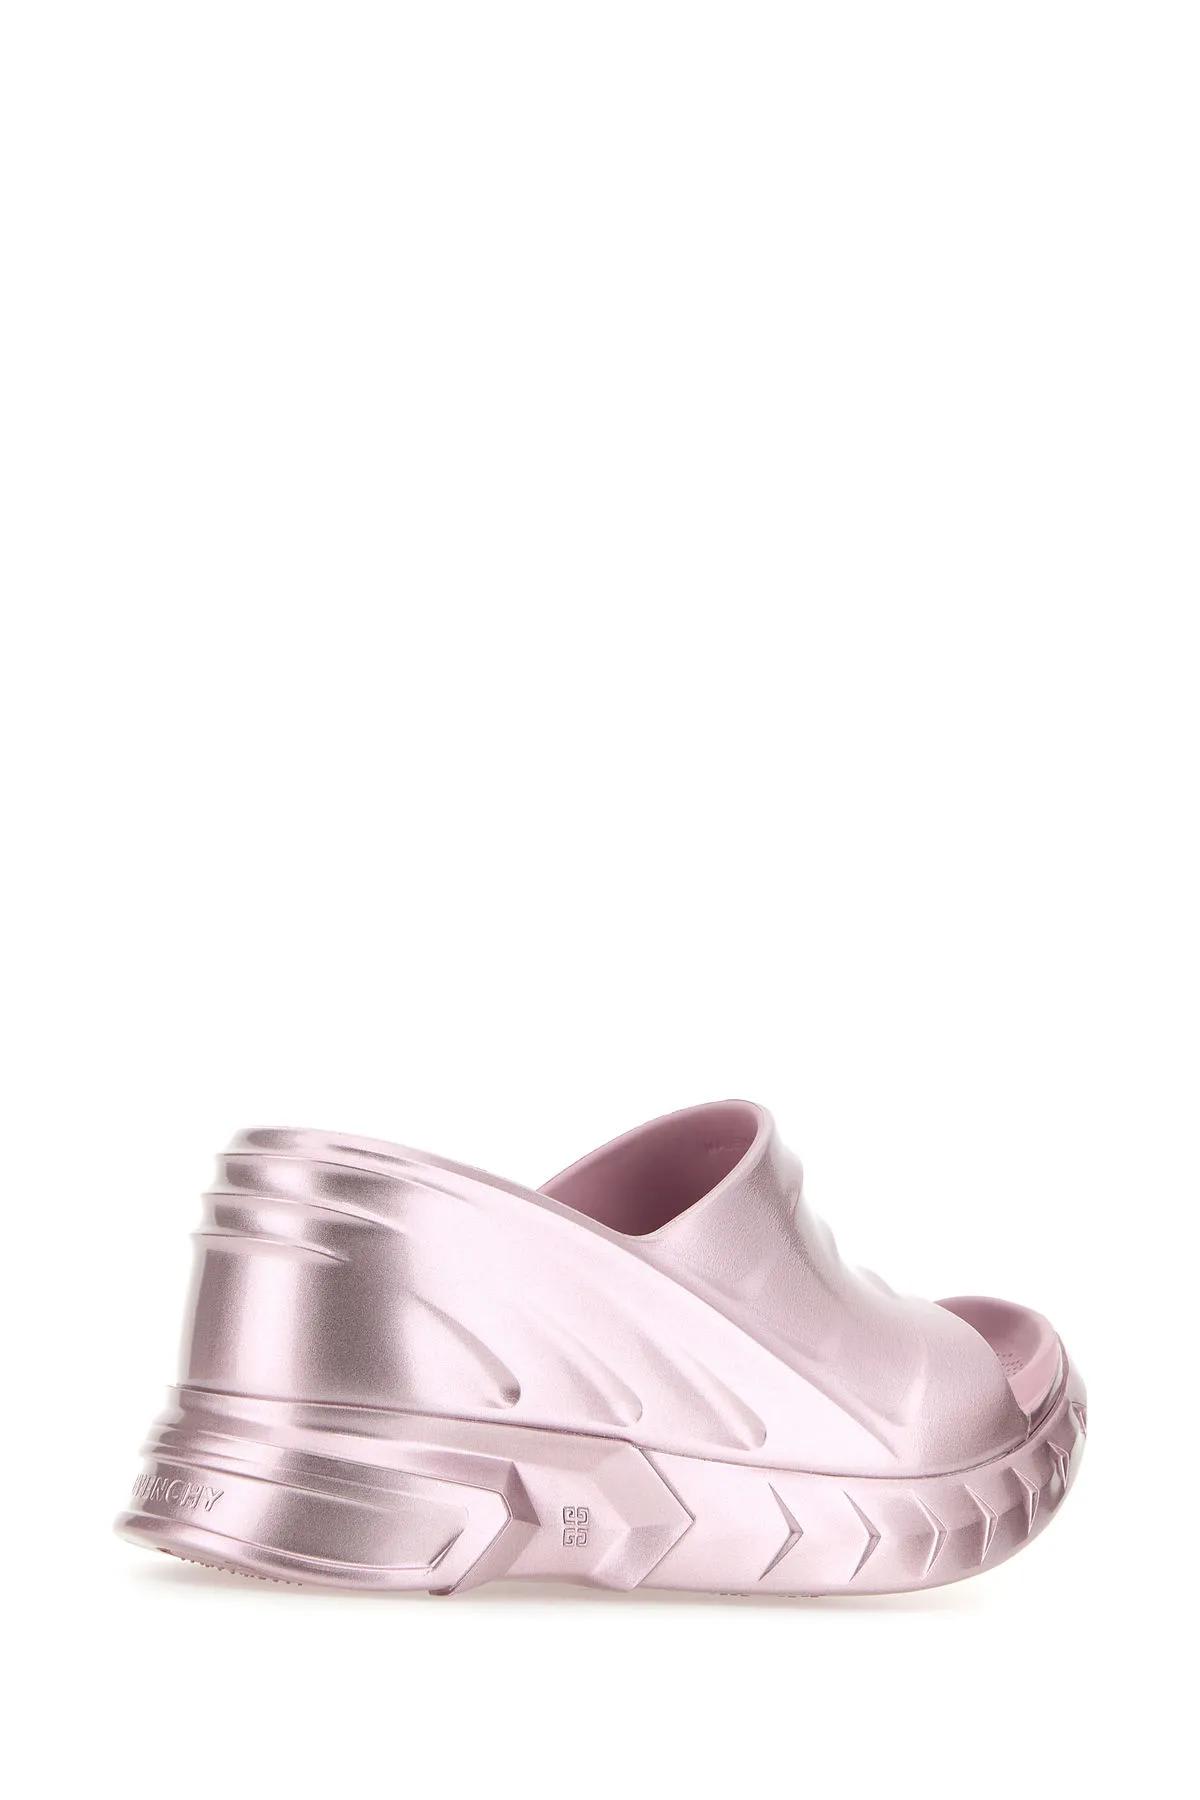 Shop Givenchy Pink Rubber Marshmallow Mules